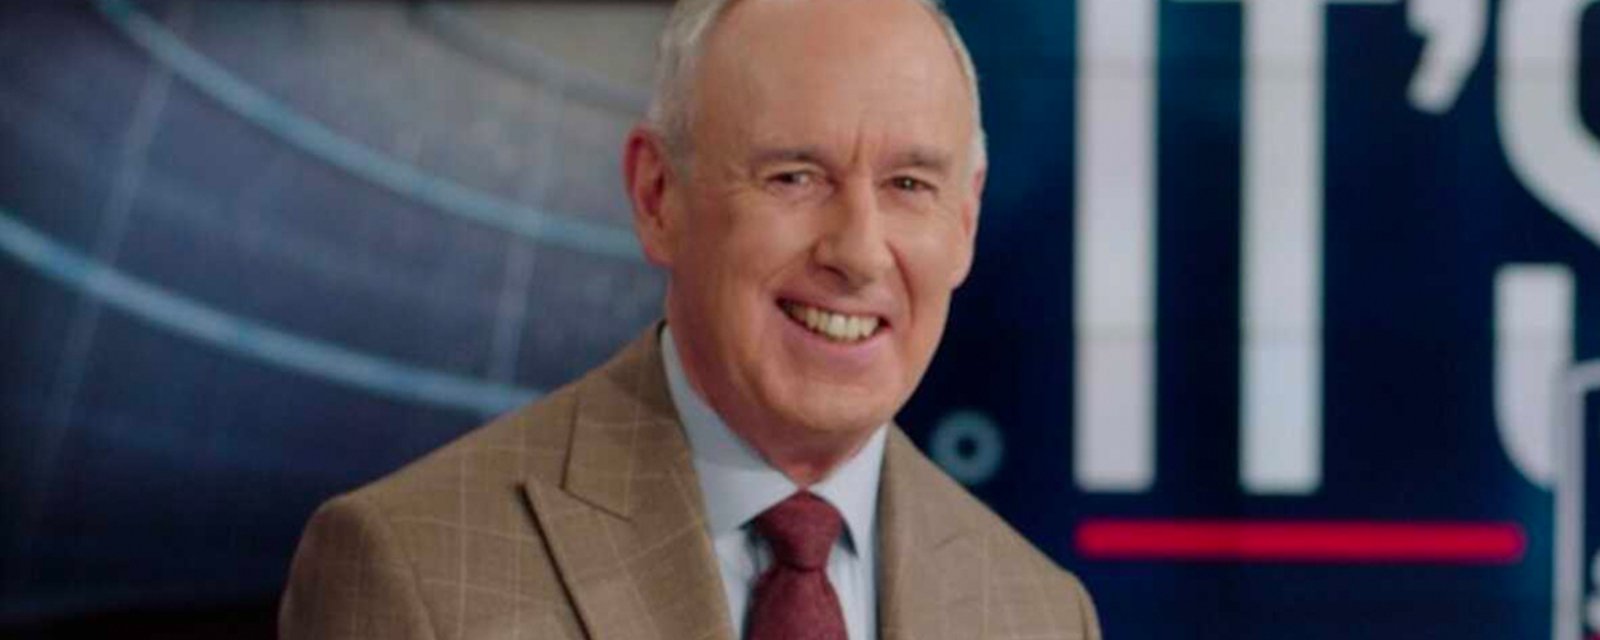 Ron MacLean apologizes for comments, claims he was misunderstood